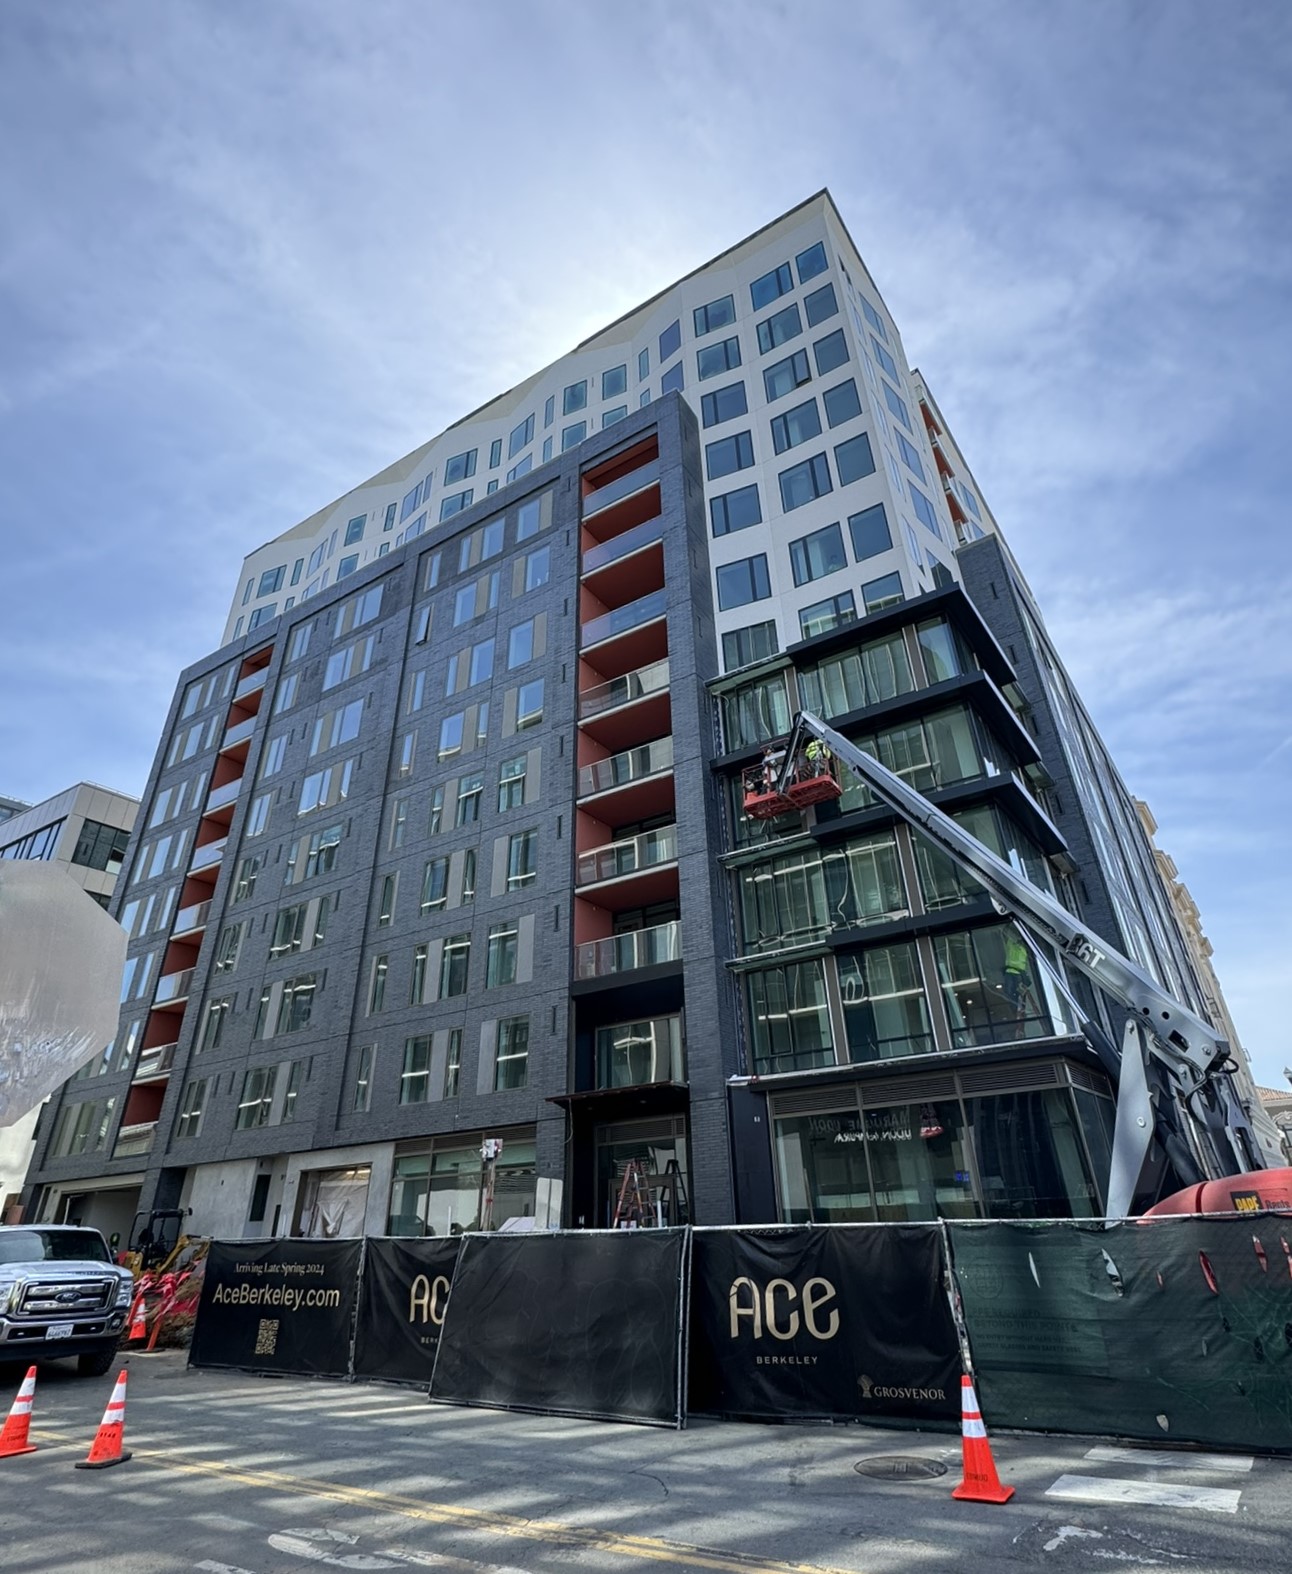 Image from the Gallery: ACE Apartments – Berkeley, CA